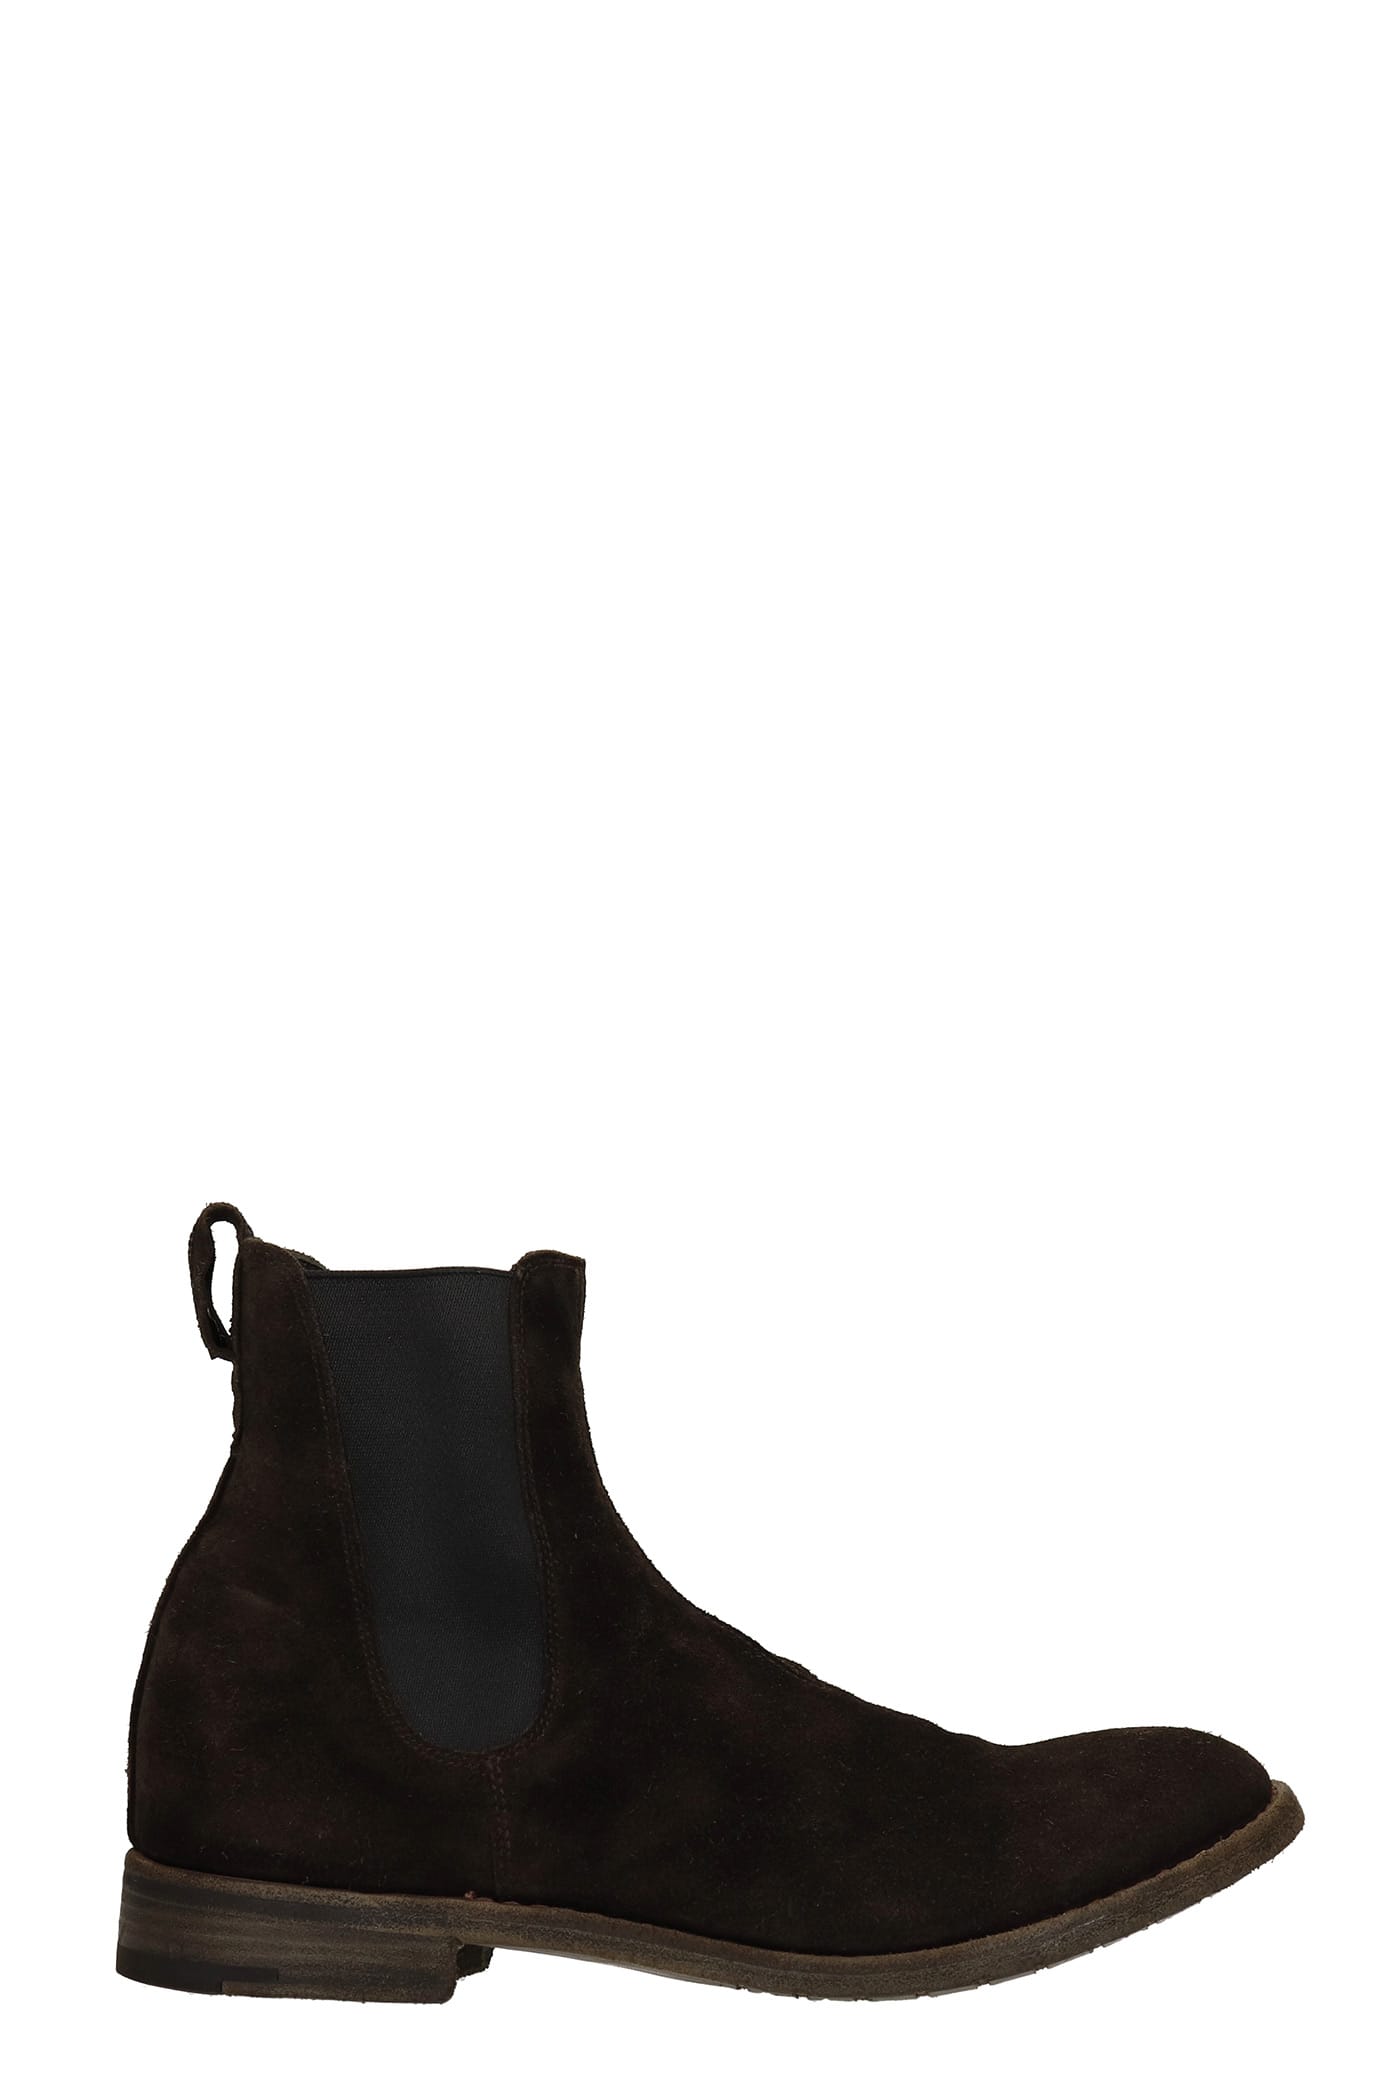 Premiata Ankle Boots In Brown Suede